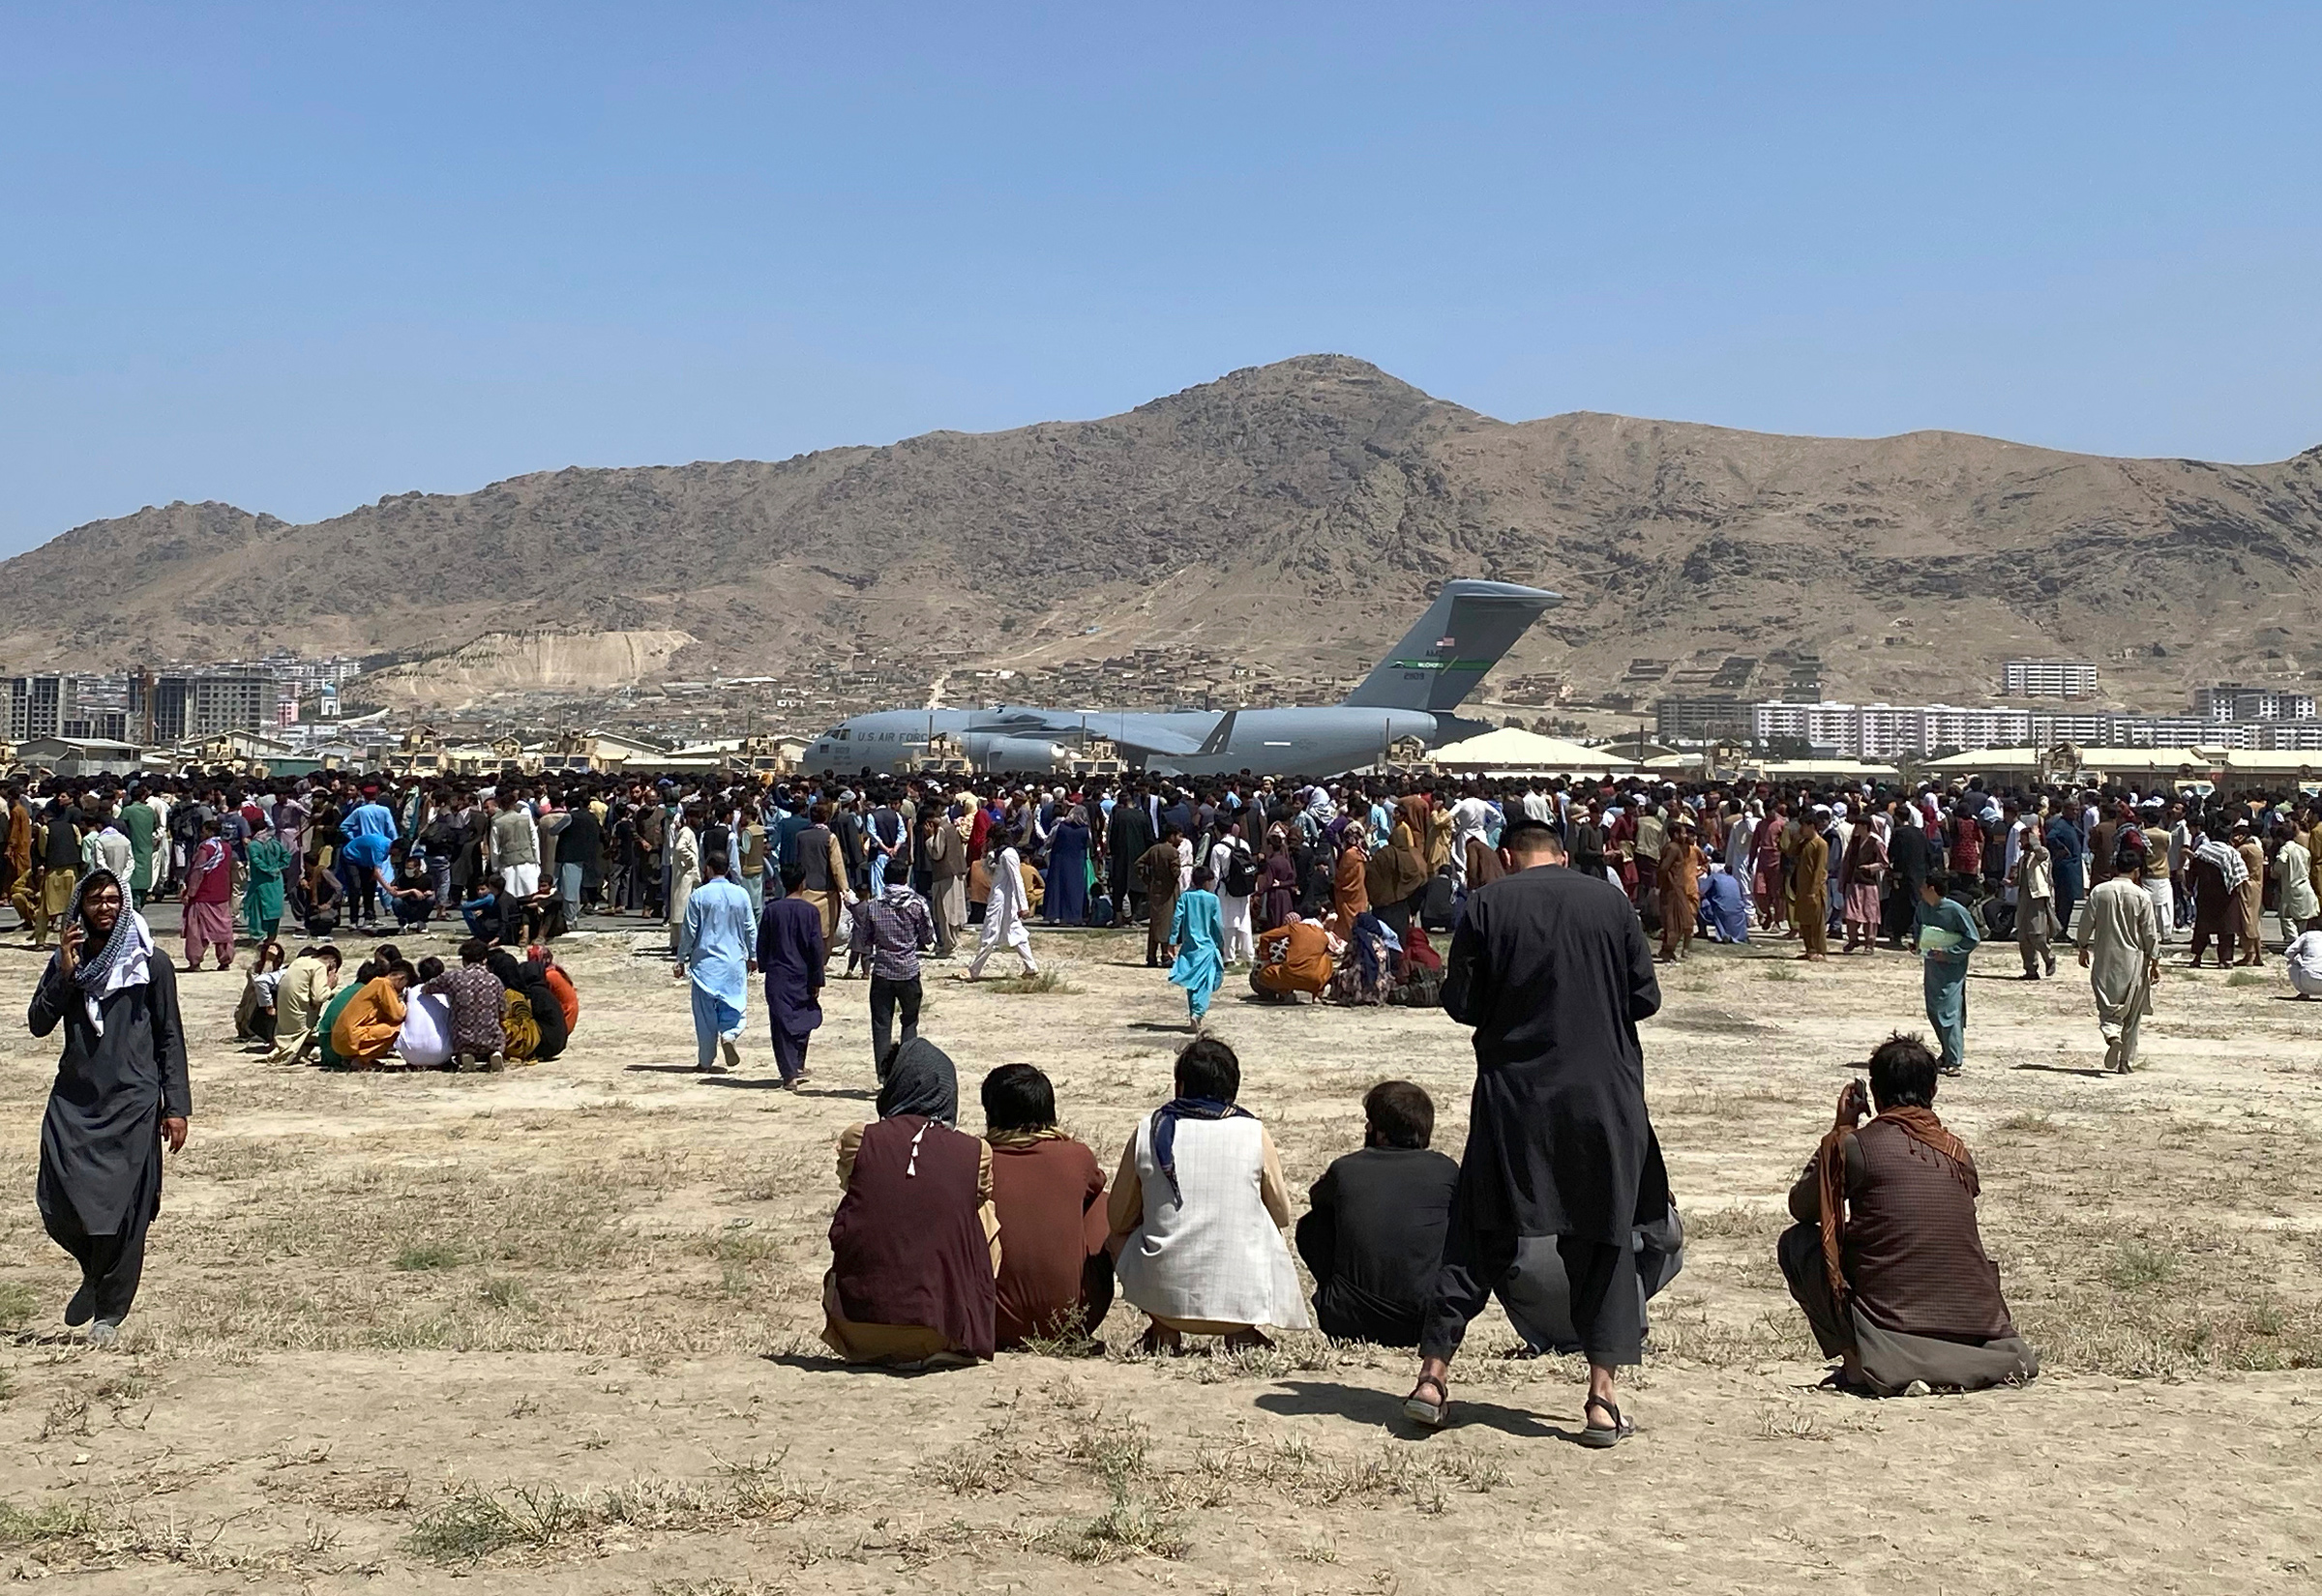 Hundreds of people gather near a U.S. Air Force C-17 transport plane at a perimeter at the international airport in Kabul on Monday, Aug. 16. (Shekib Rahmani—AP)